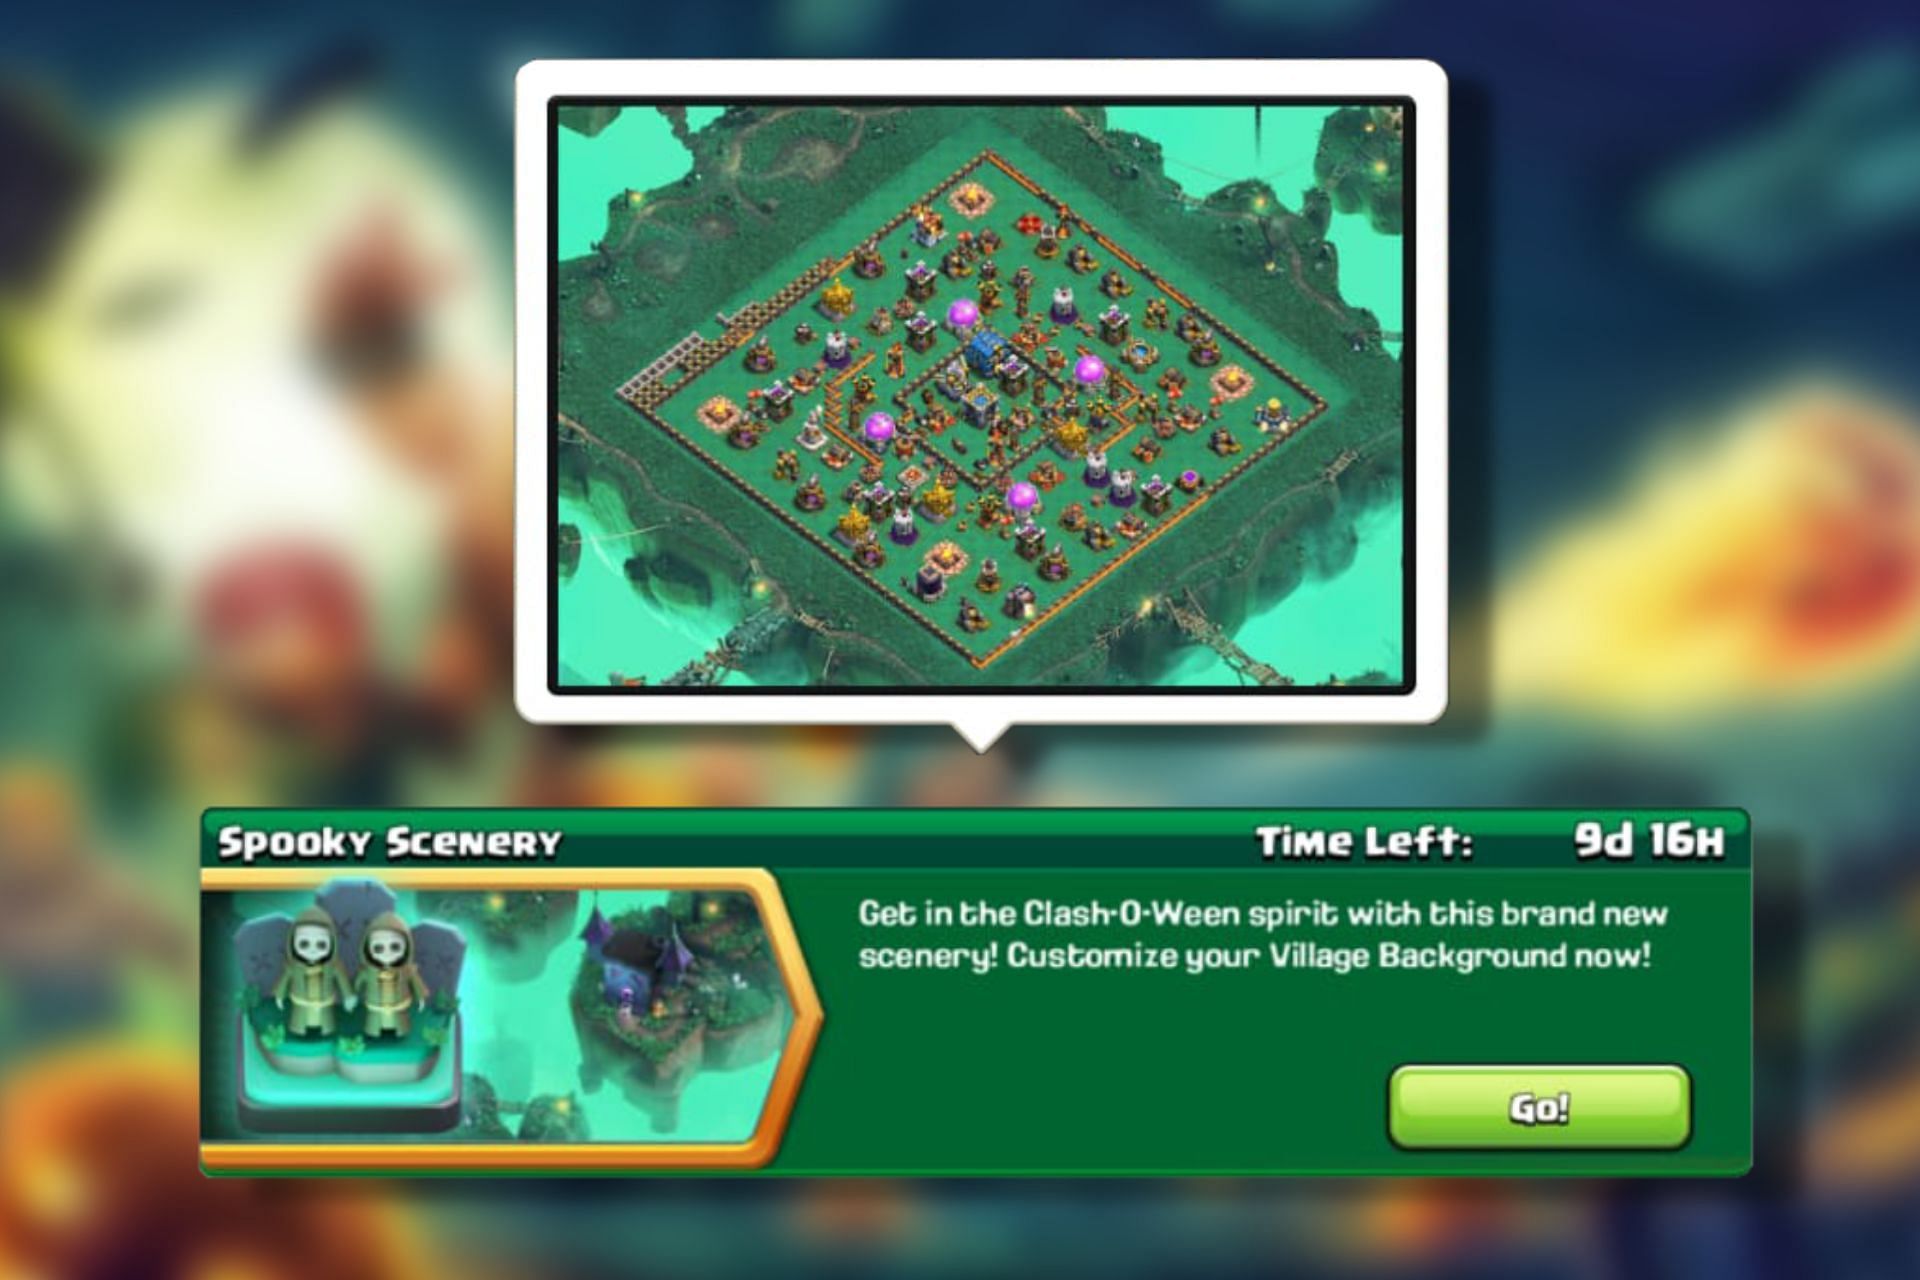 Spooky Scenery in Clash of Clans: How to unlock and more